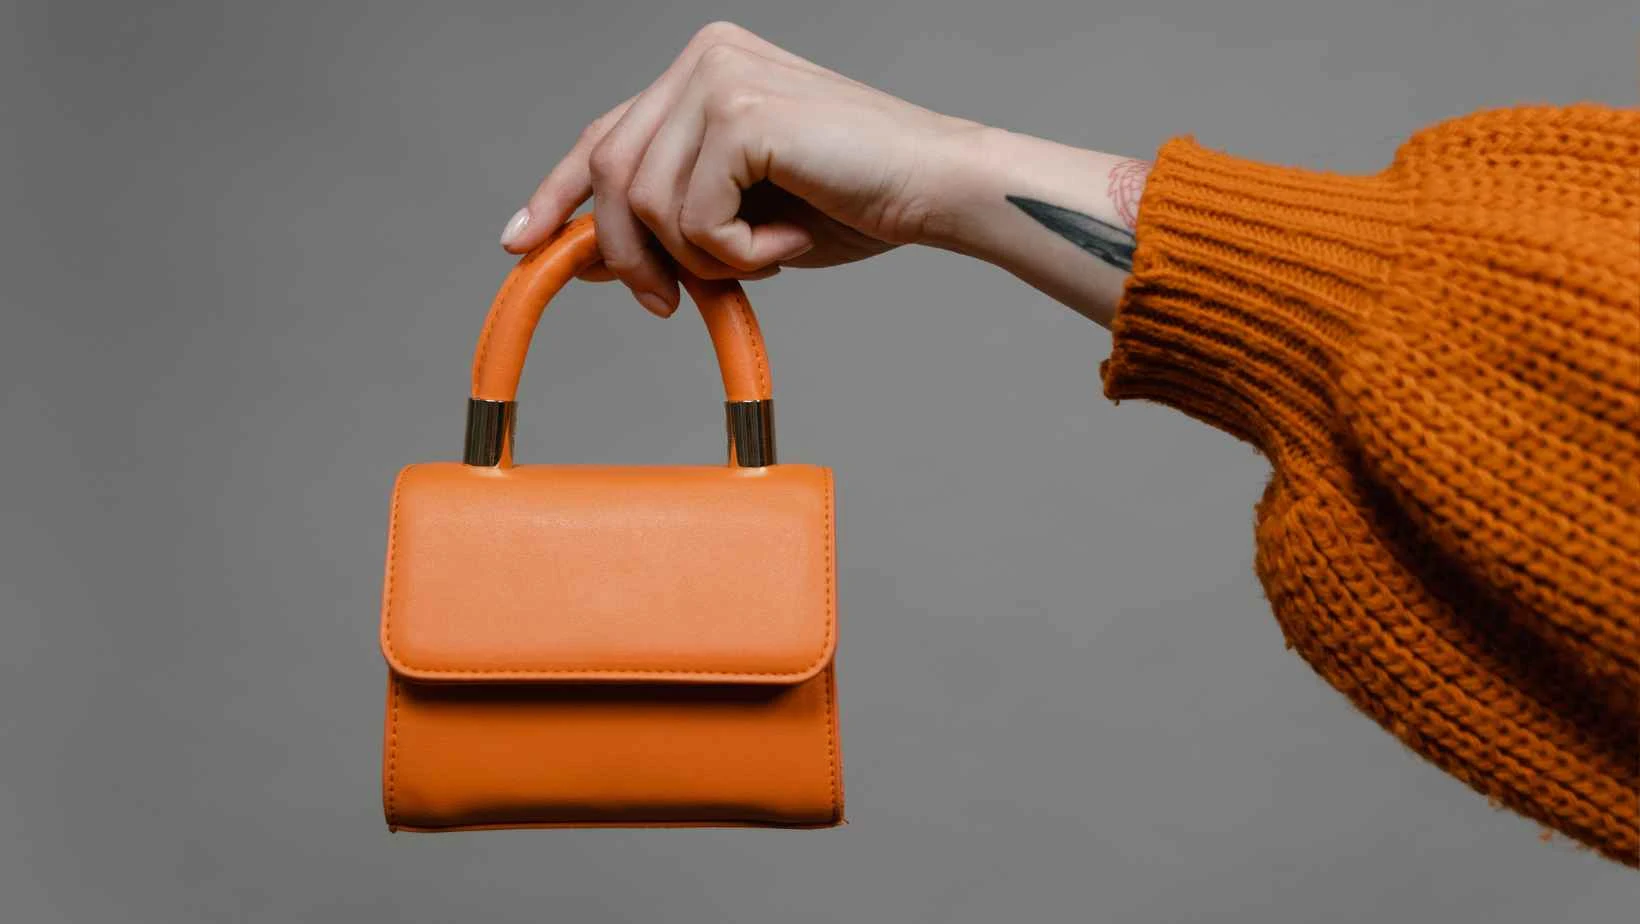 A image of an arm holding an orange handbag stock image from canva pro